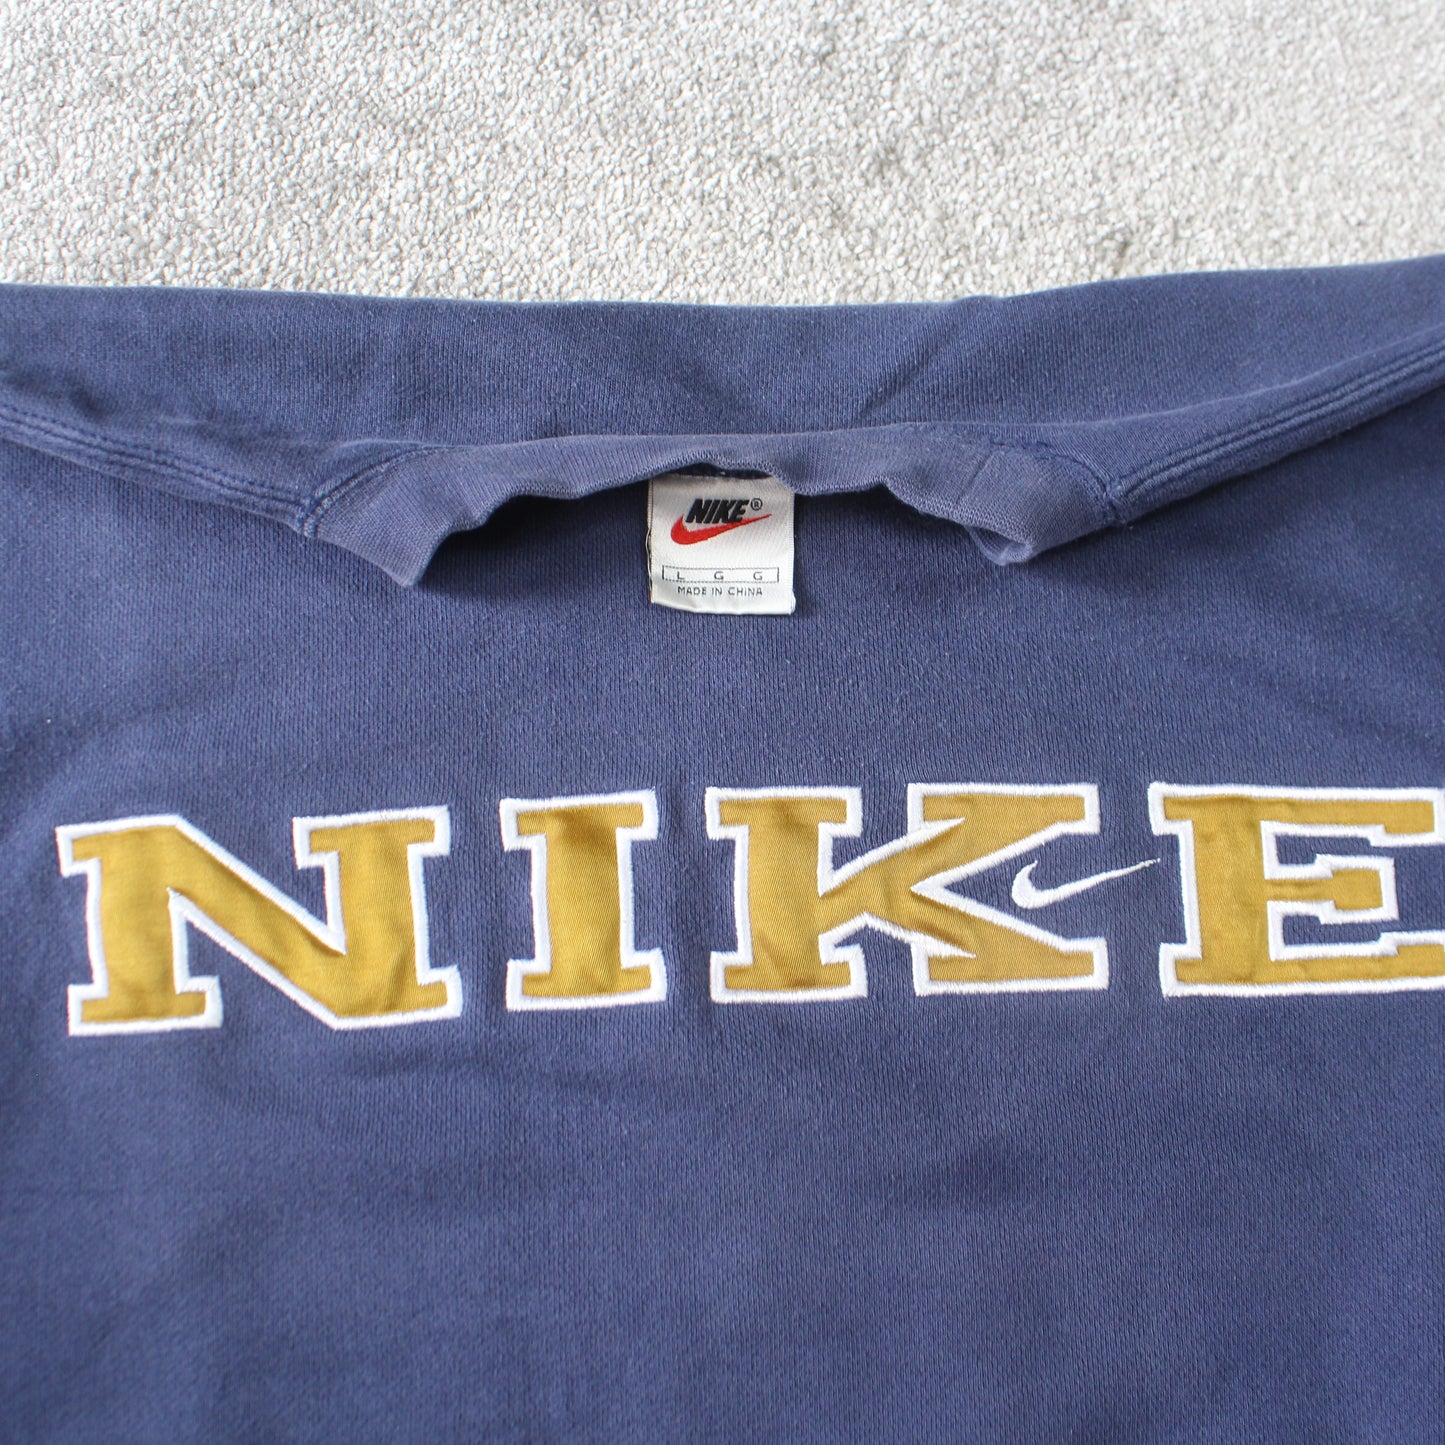 SUPER RARE Vintage 1990s Nike Spell Out Sweatshirt - (S)